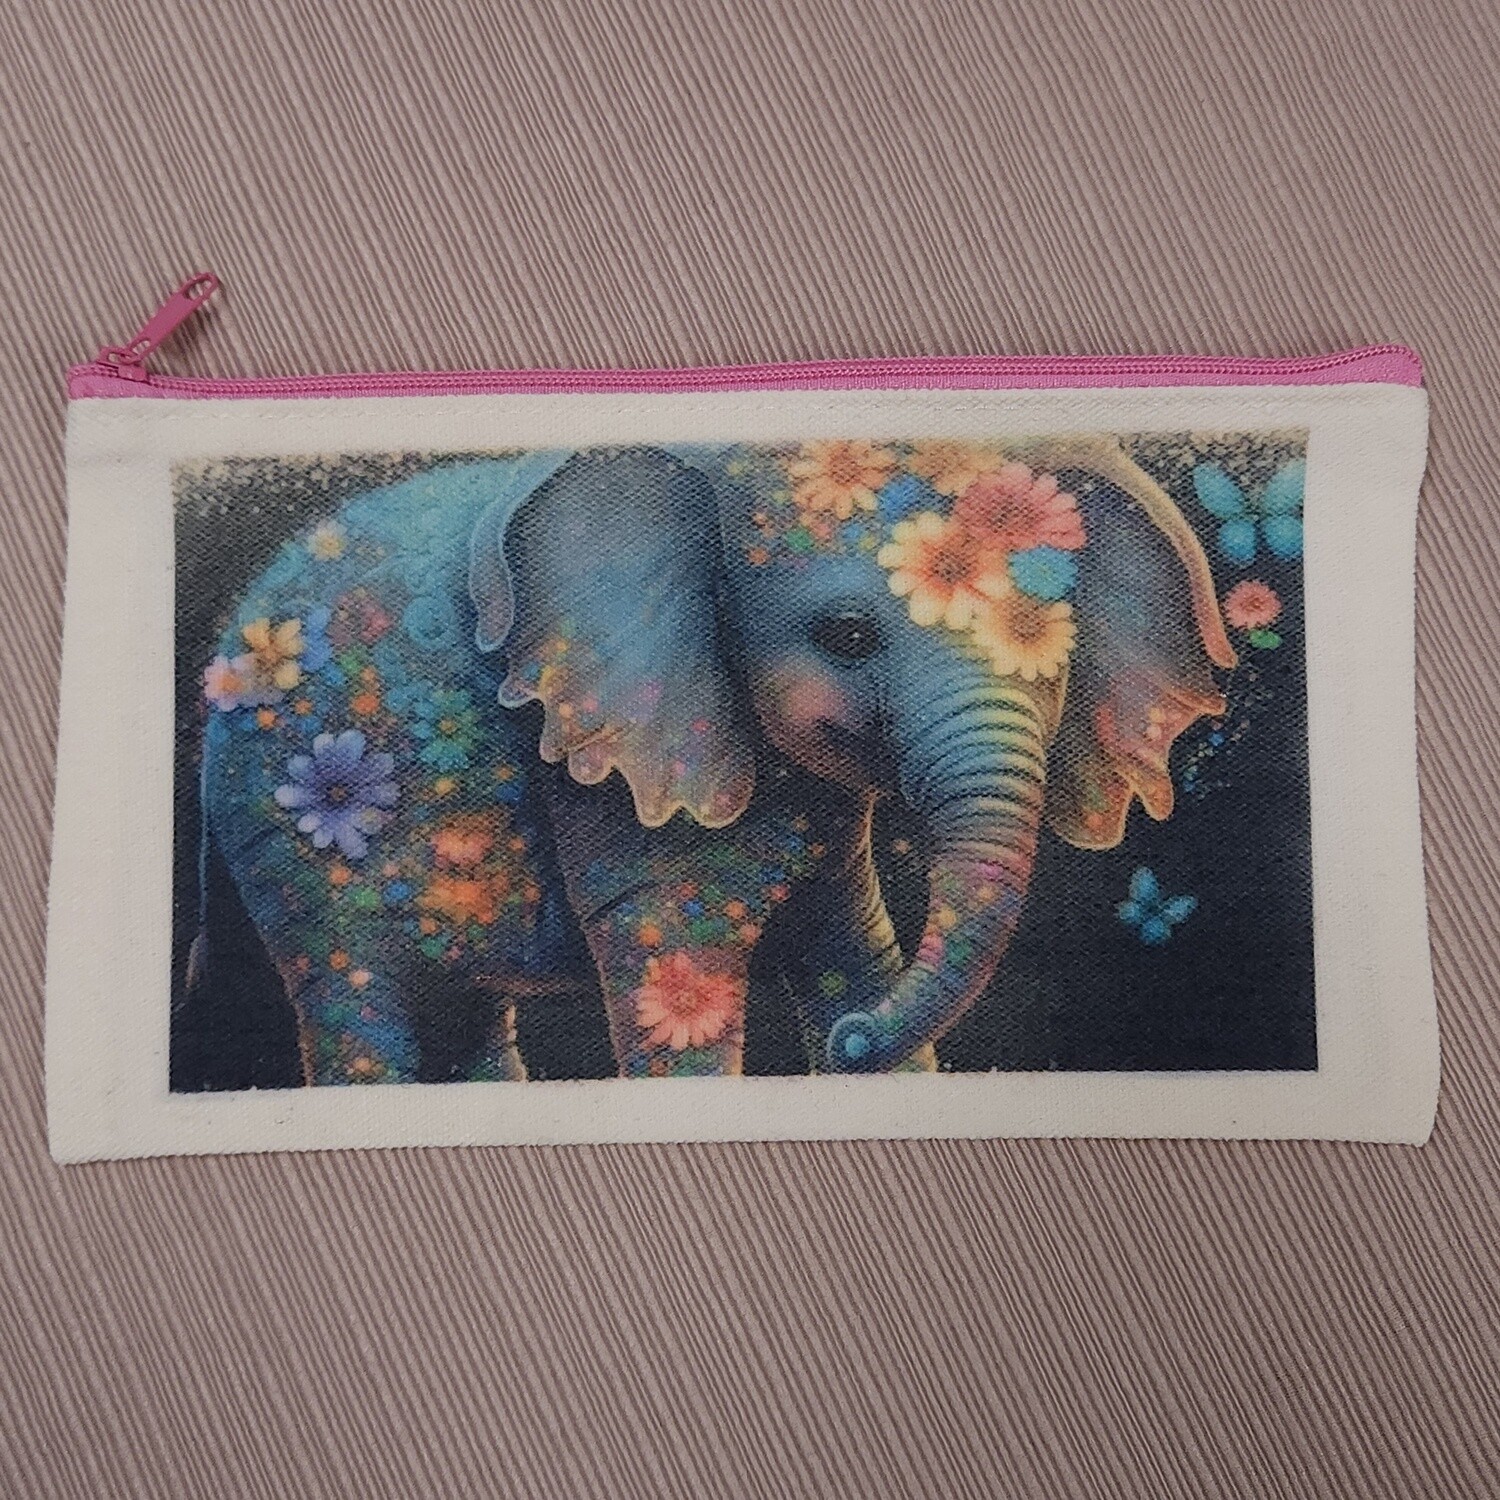 Flowered Elephant Pouch